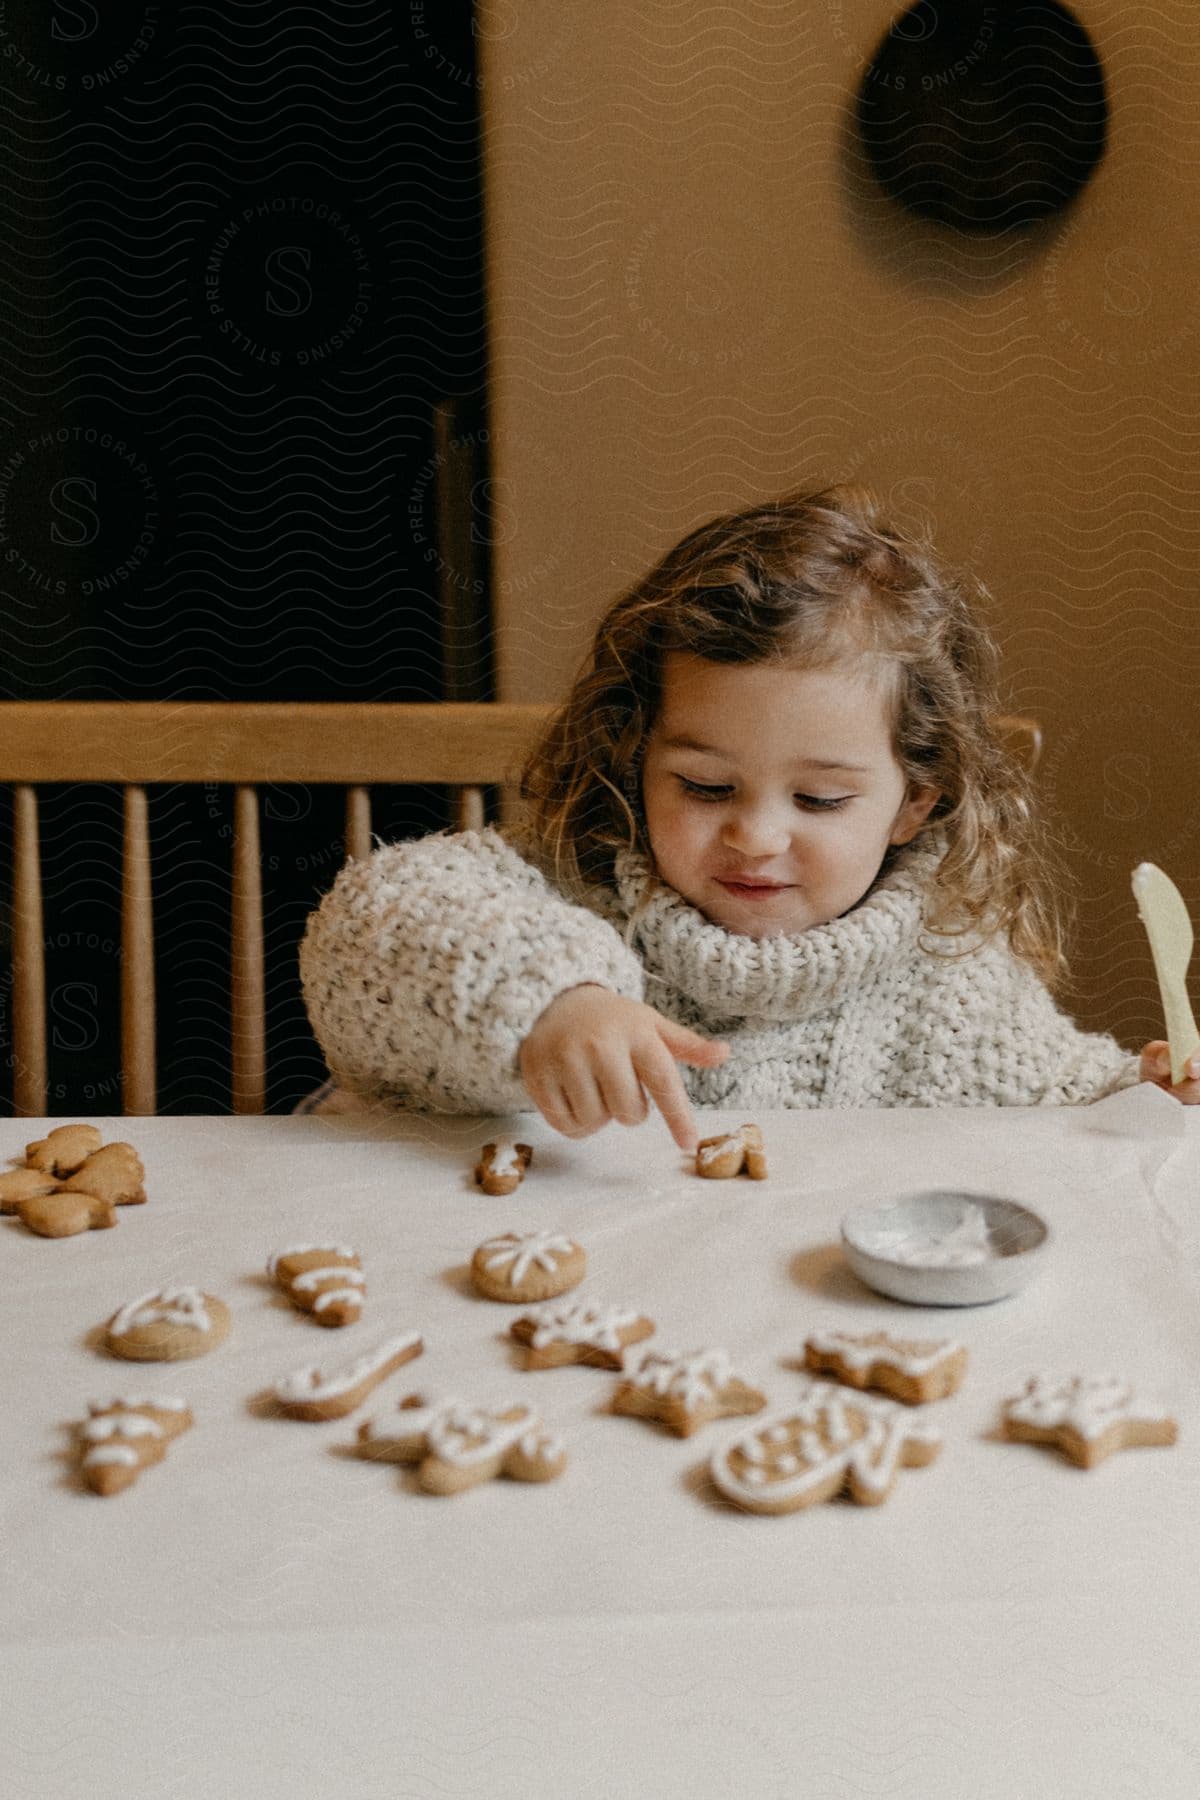 Girl wearing a sweater plays with cookies